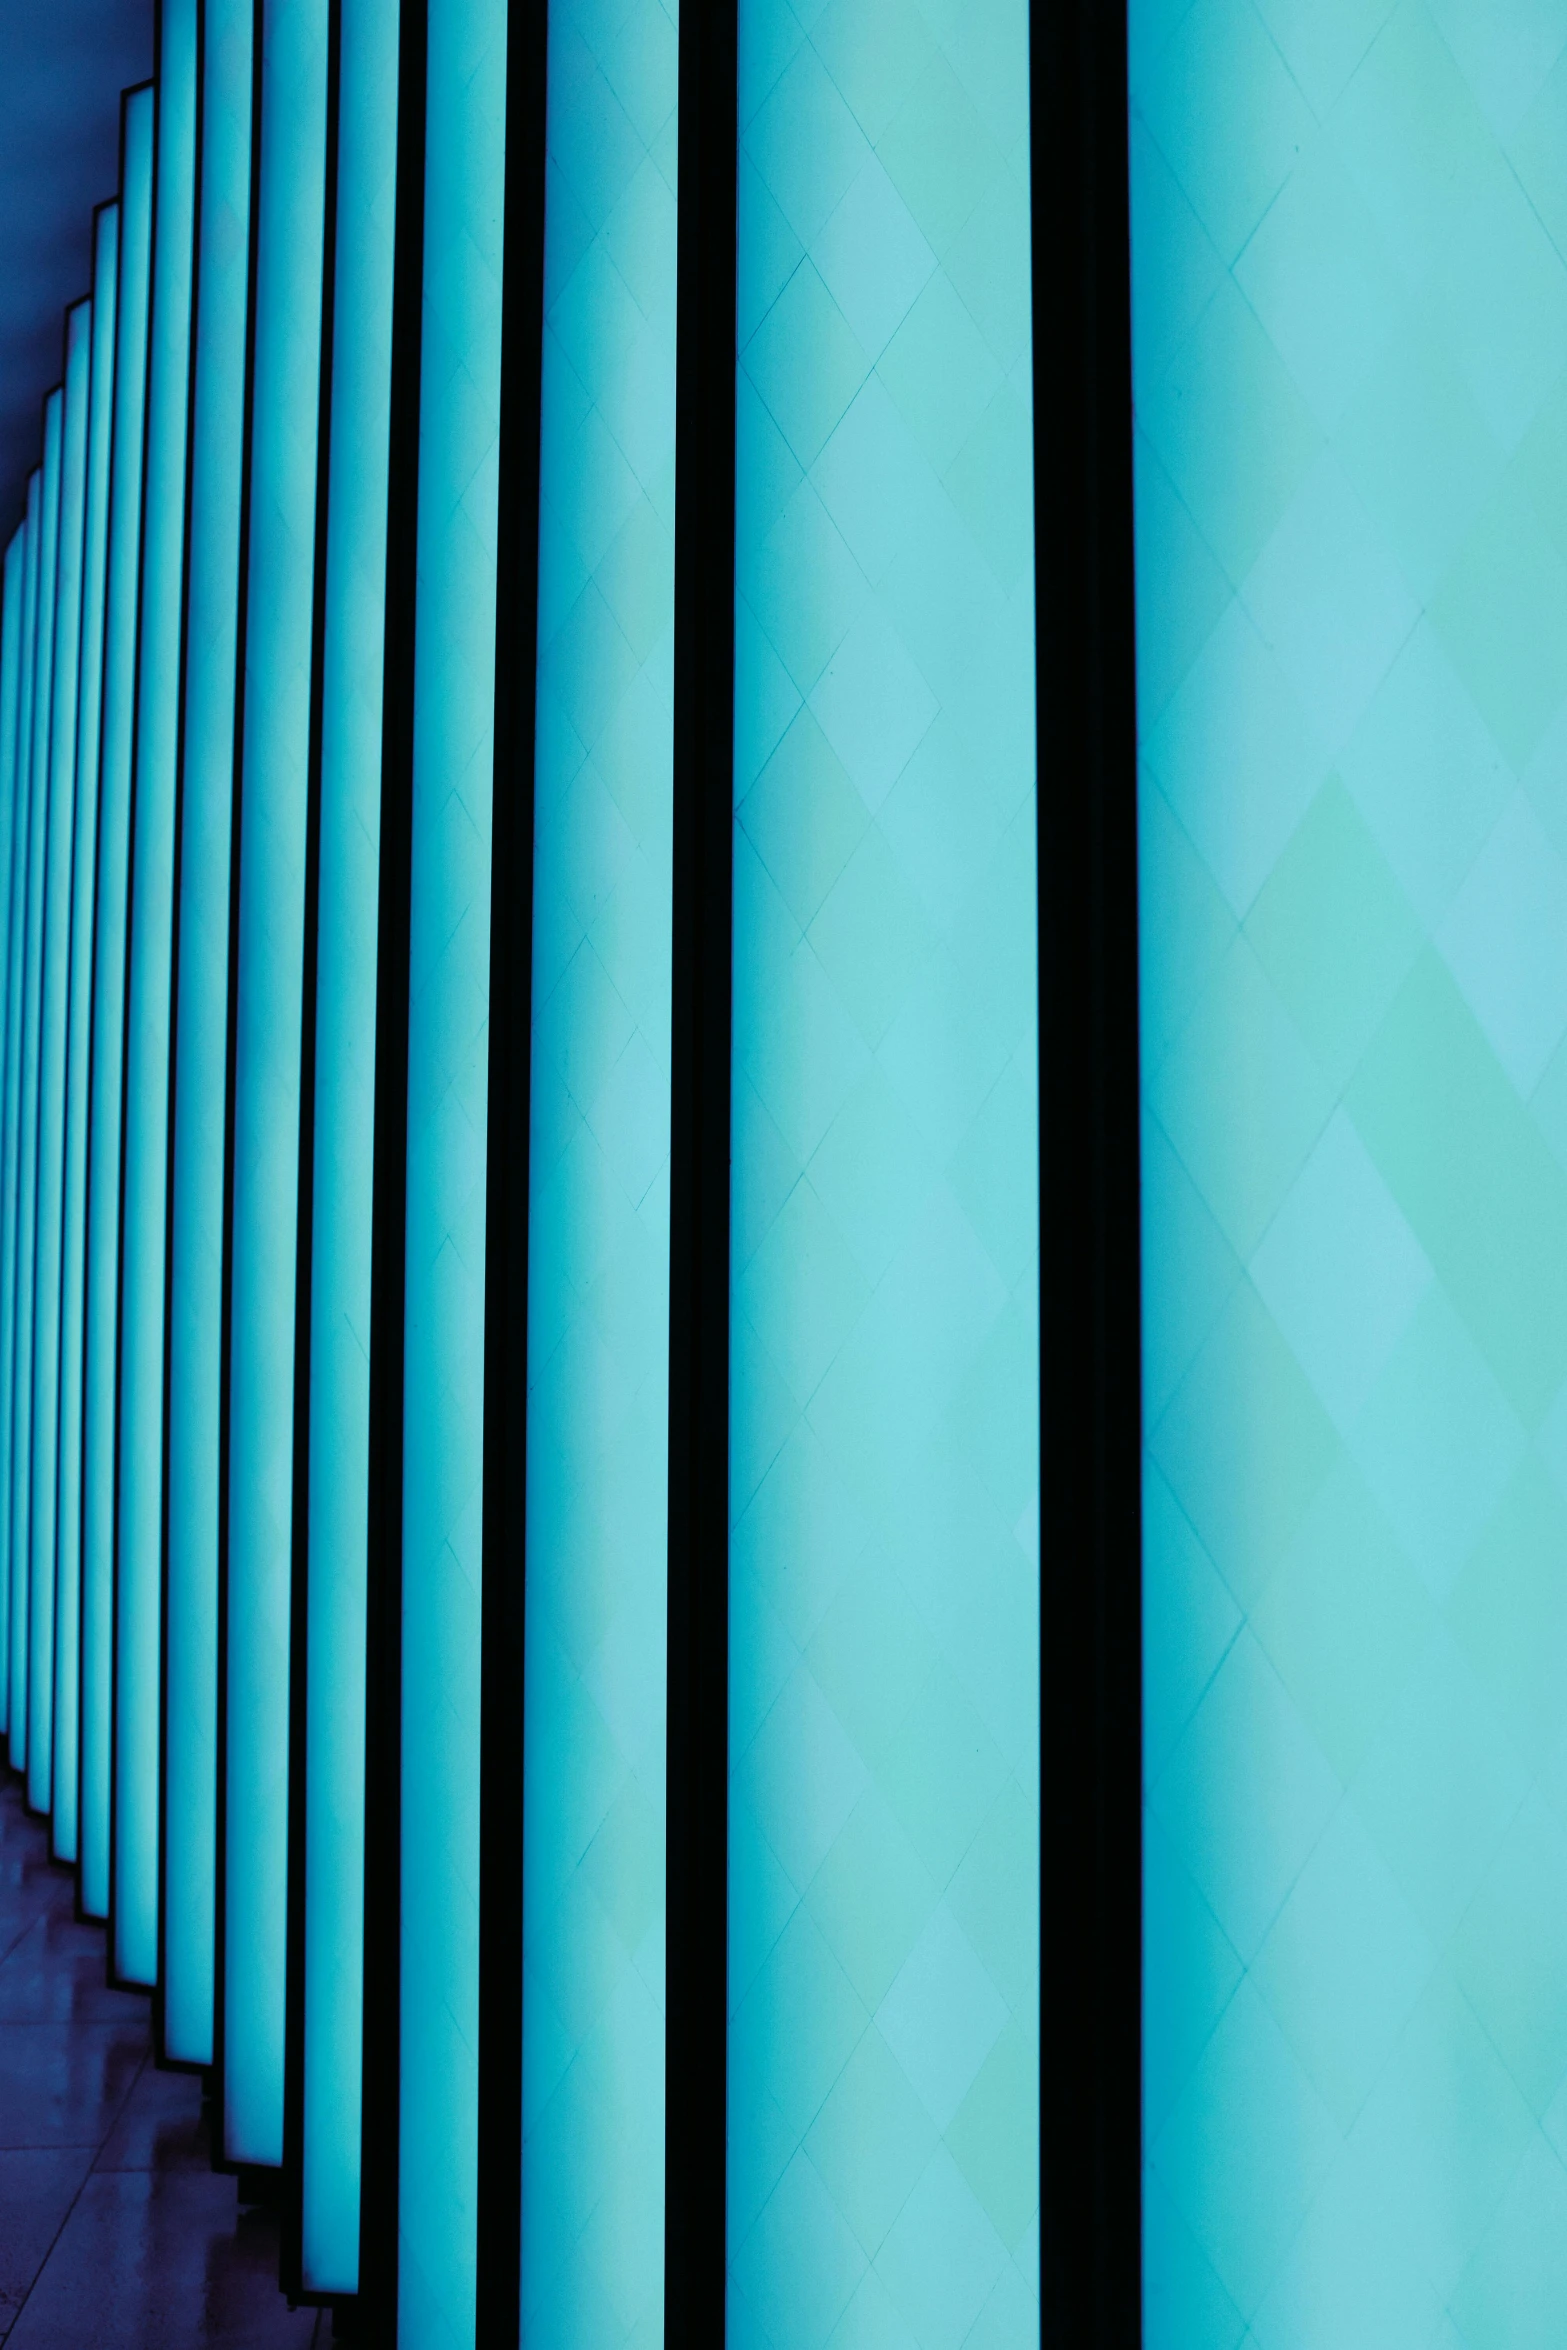 an abstract pograph with multiple stacks of vertical blinds in blue